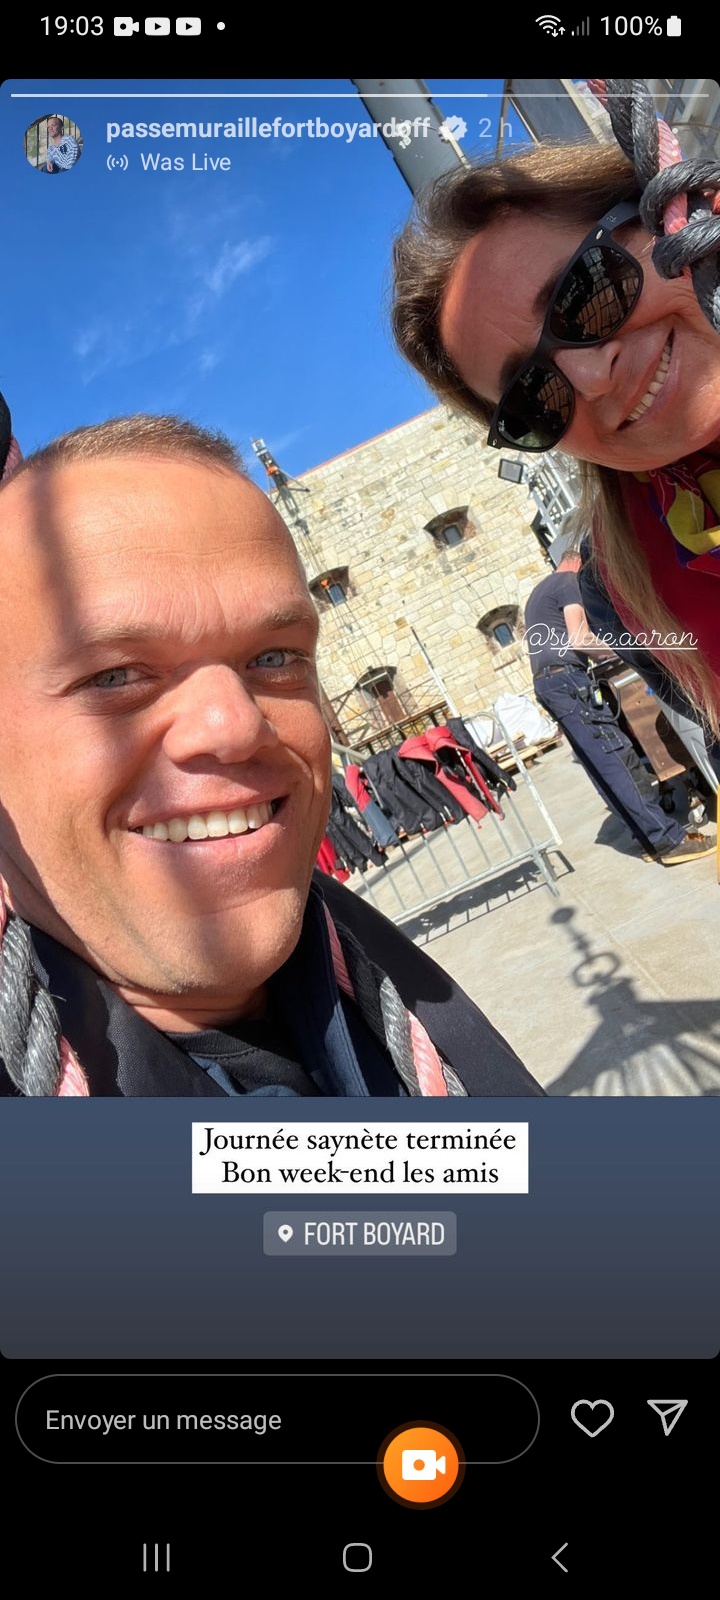 Photos des tournages Fort Boyard 2023 (production + candidats) - Page 16 Xrecor11